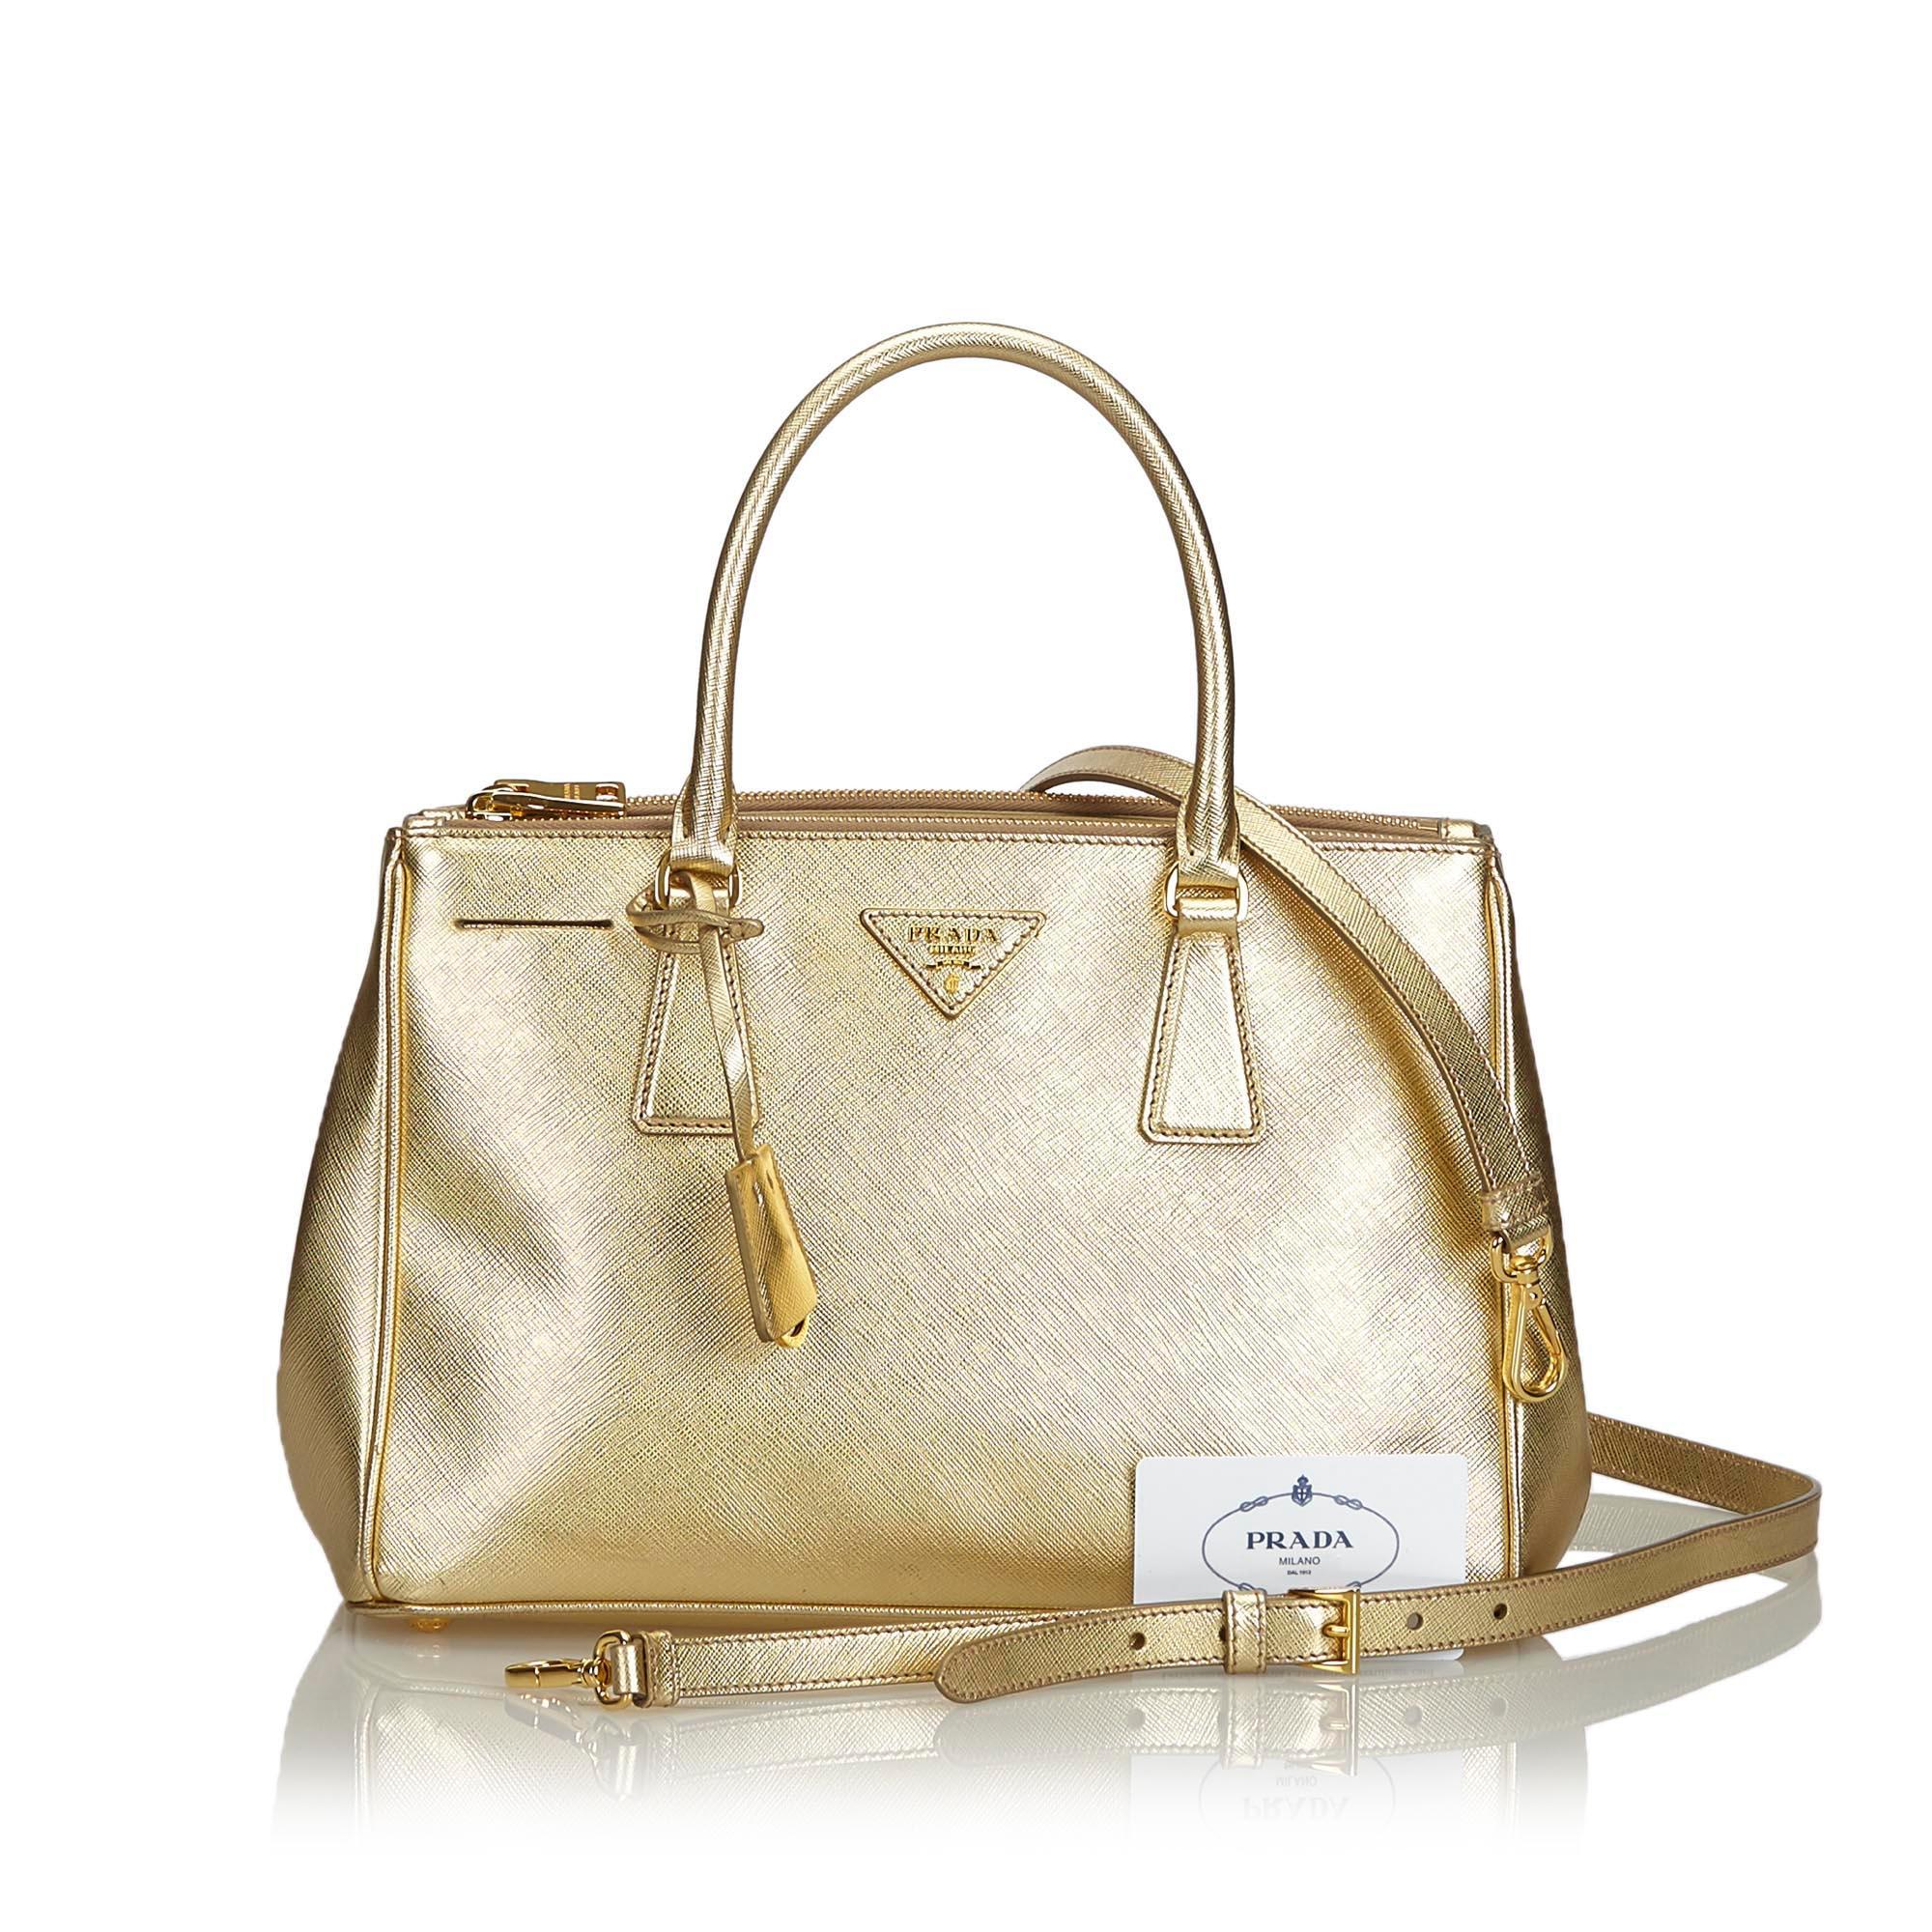 Prada Gold  Leather Saffiano Galleria Satchel Italy w/ Authenticity Card For Sale 8